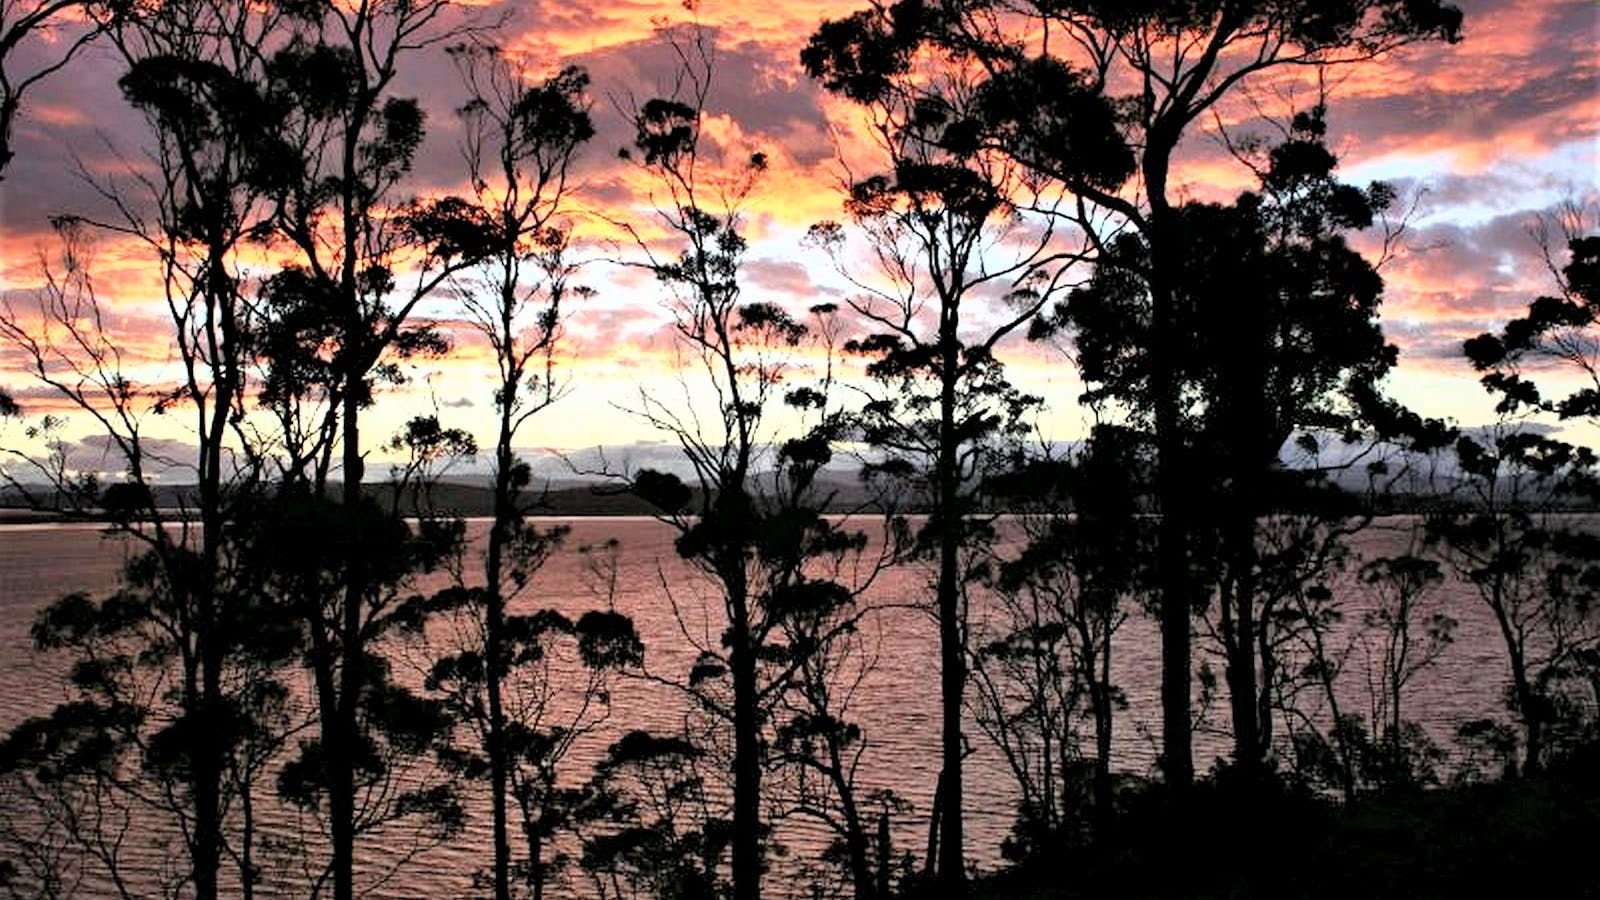 The end of another perfect day, sunset over Ralphs Bay, taken from the deck!